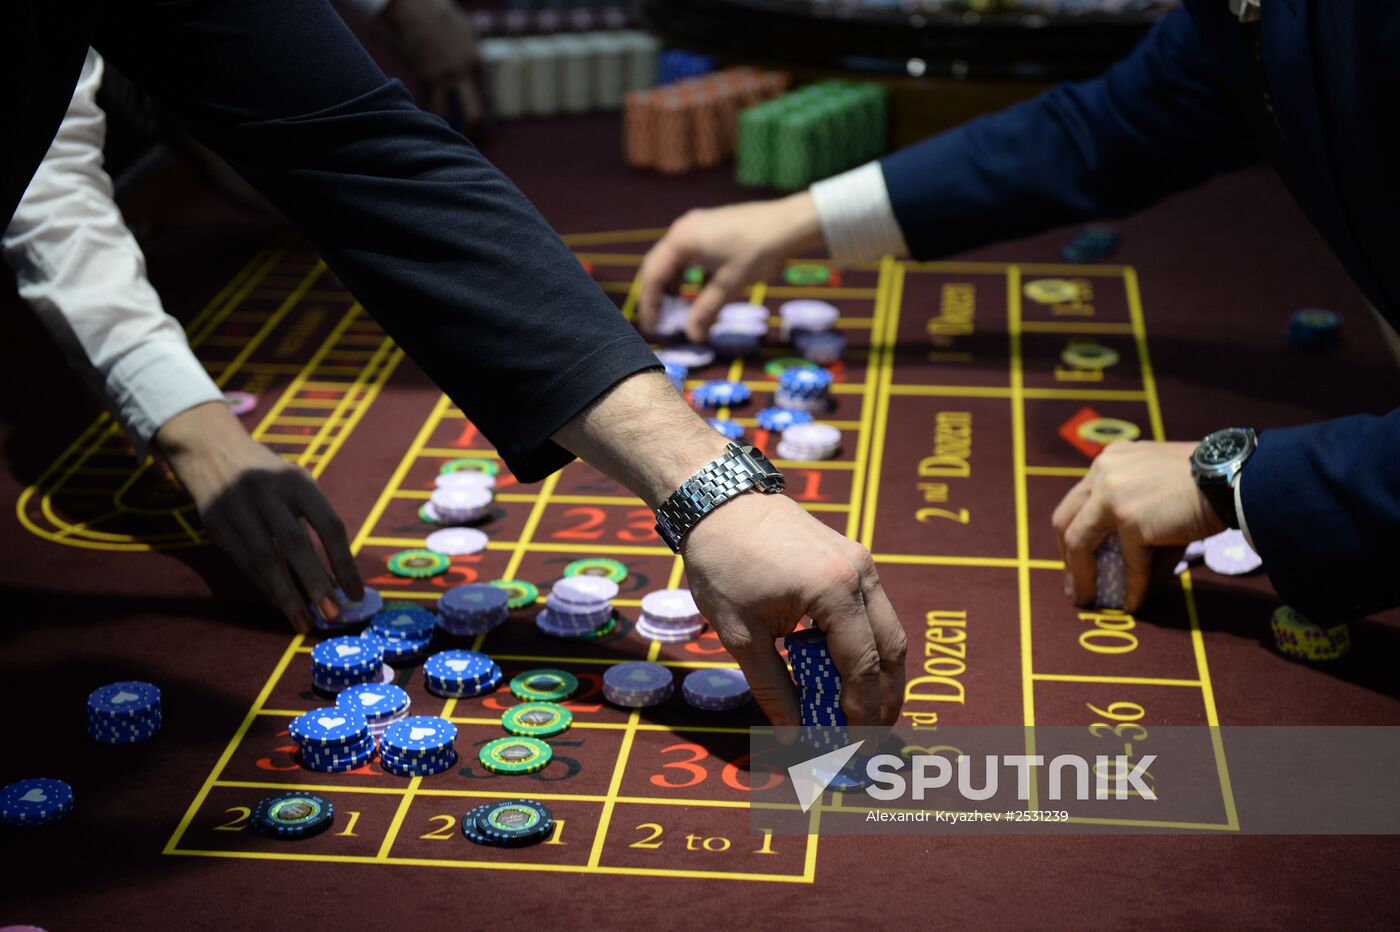 First casino of the "Siberian Coin" gambling zone